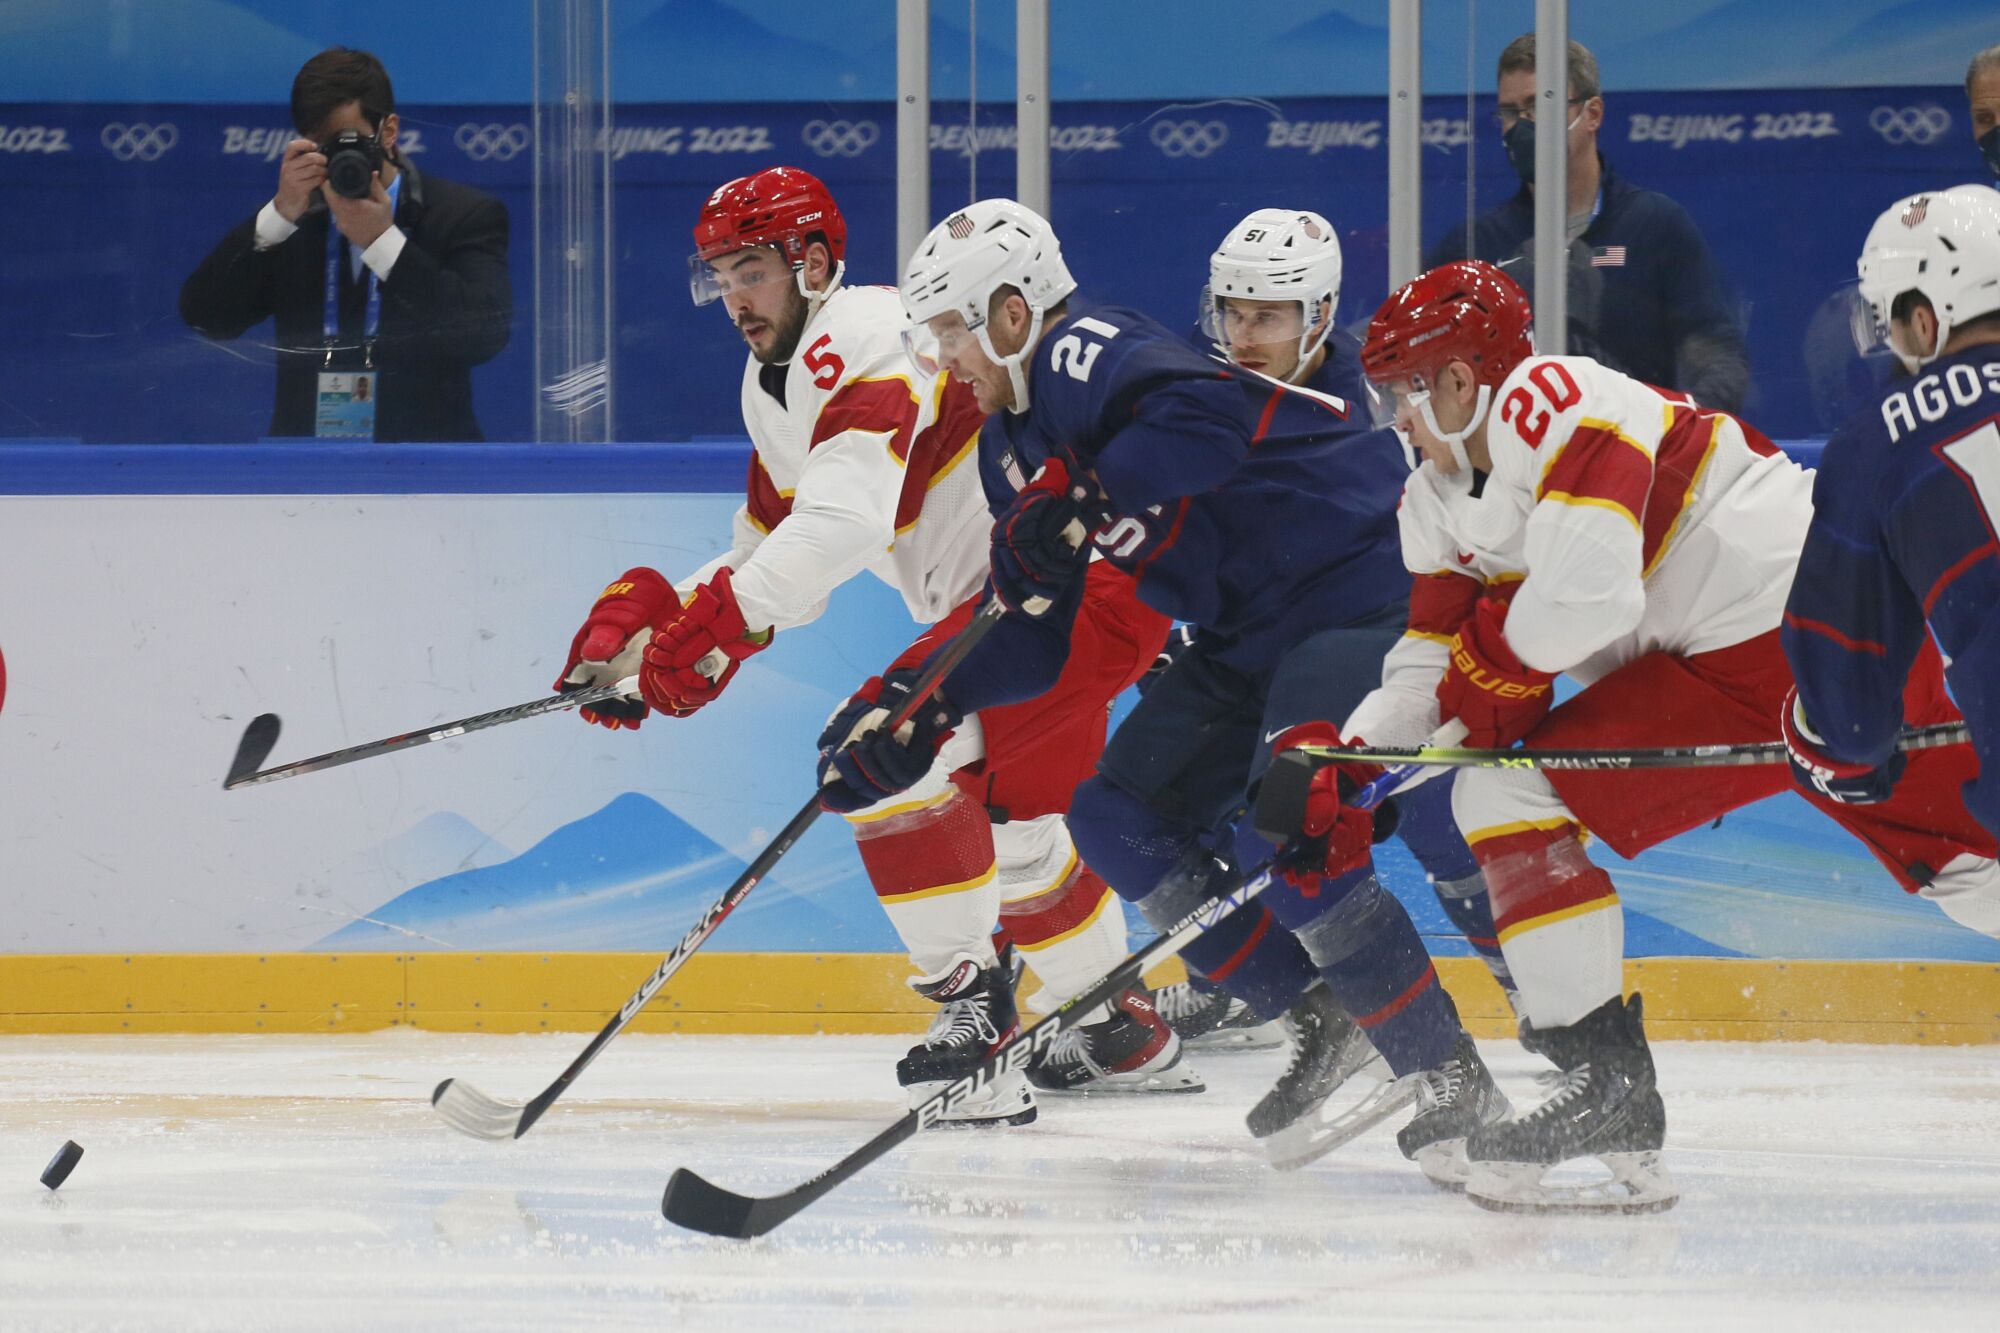 A scrum of U.S. and China players chase after the puck during a preliminary-round game at the Beijing Olympics.